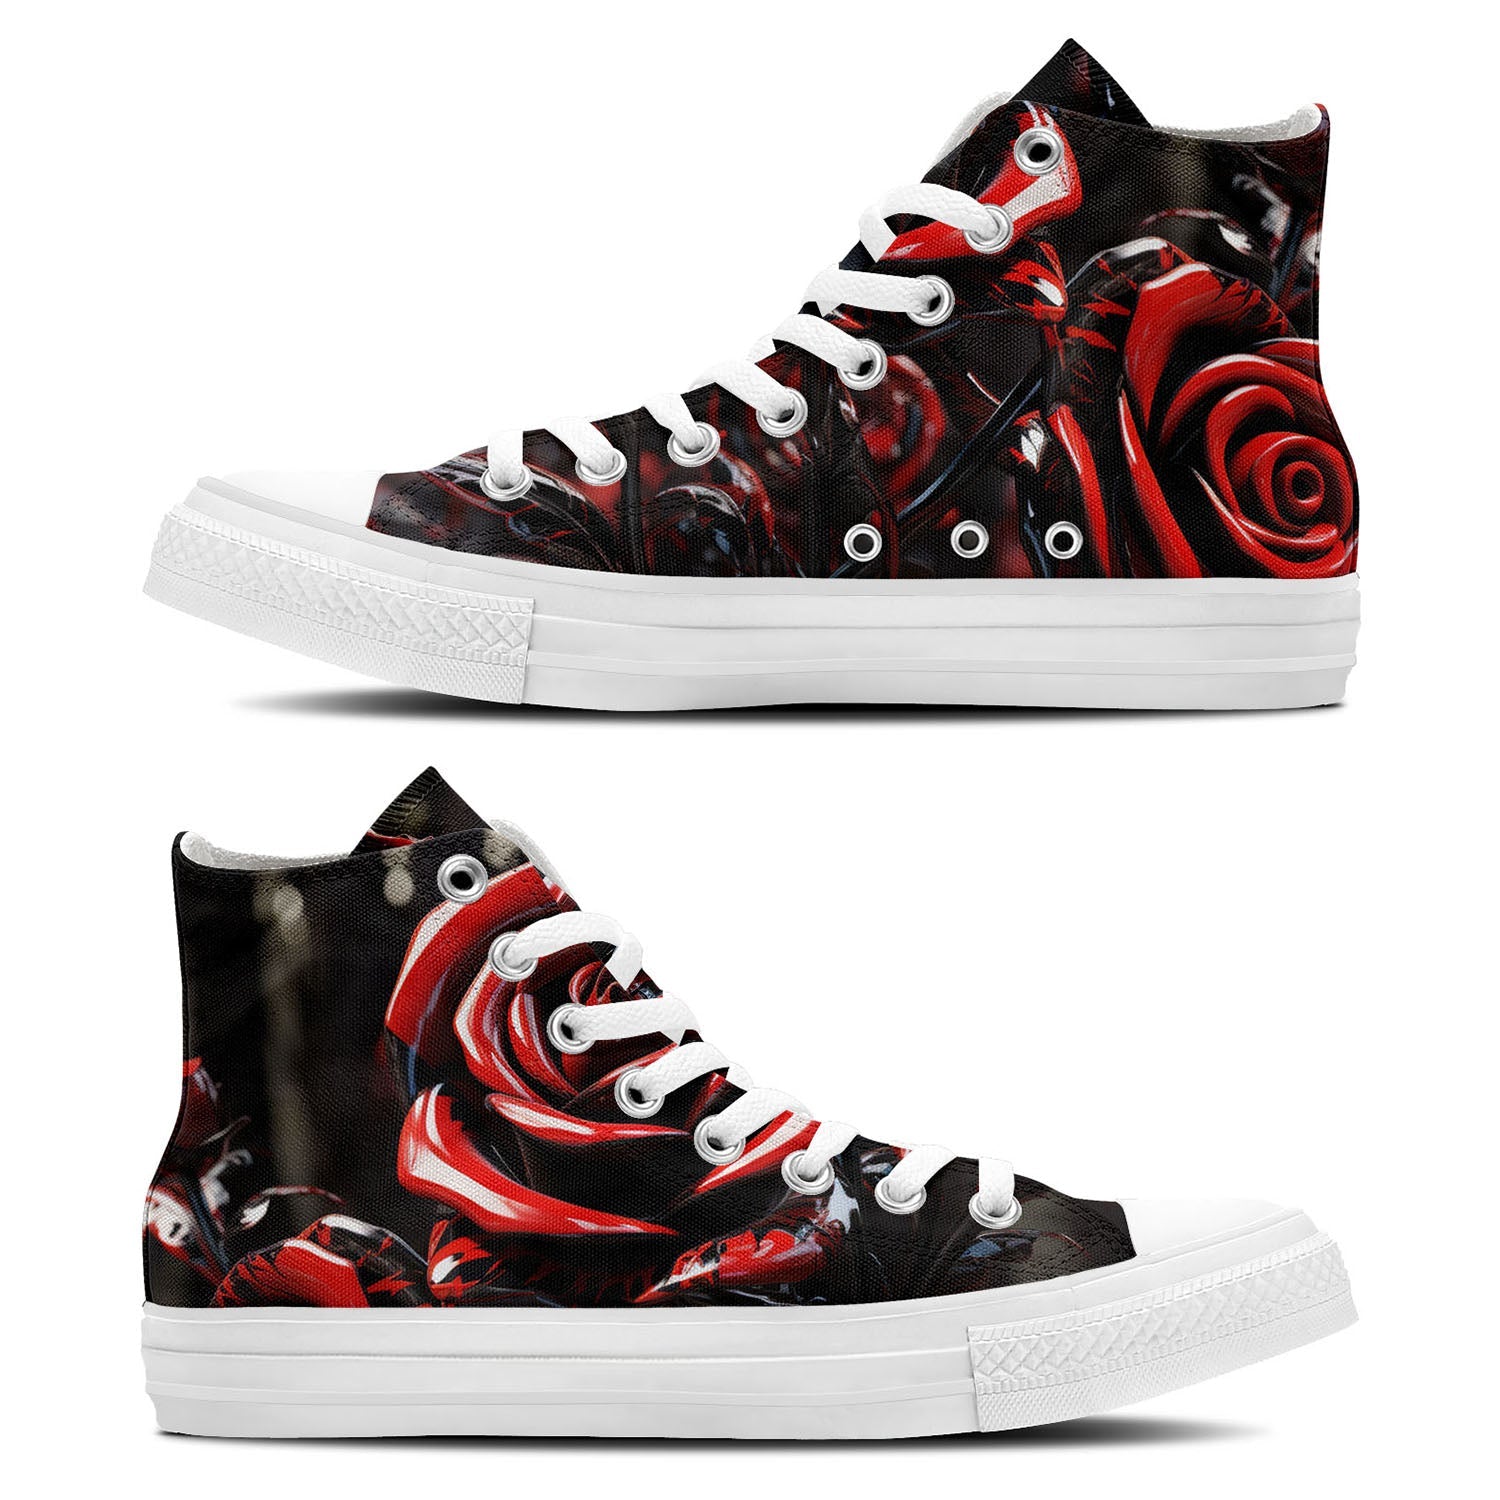 Canvas Elegance: Explore the Dark Beauty of Red Roses with Our Mid-Top Masterpieces